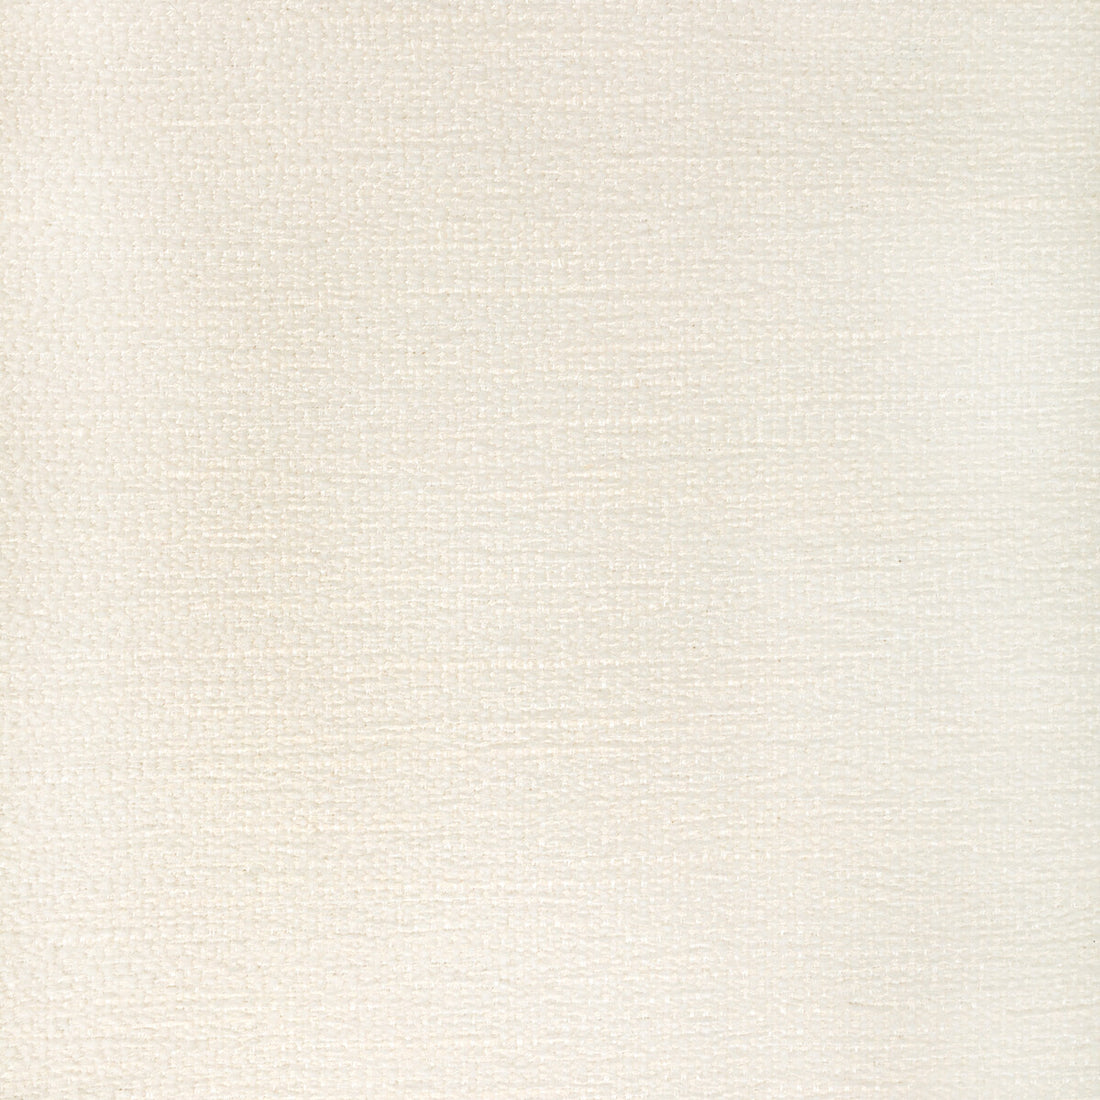 Recoup fabric in sea salt color - pattern 36569.101.0 - by Kravet Contract in the Seaqual collection